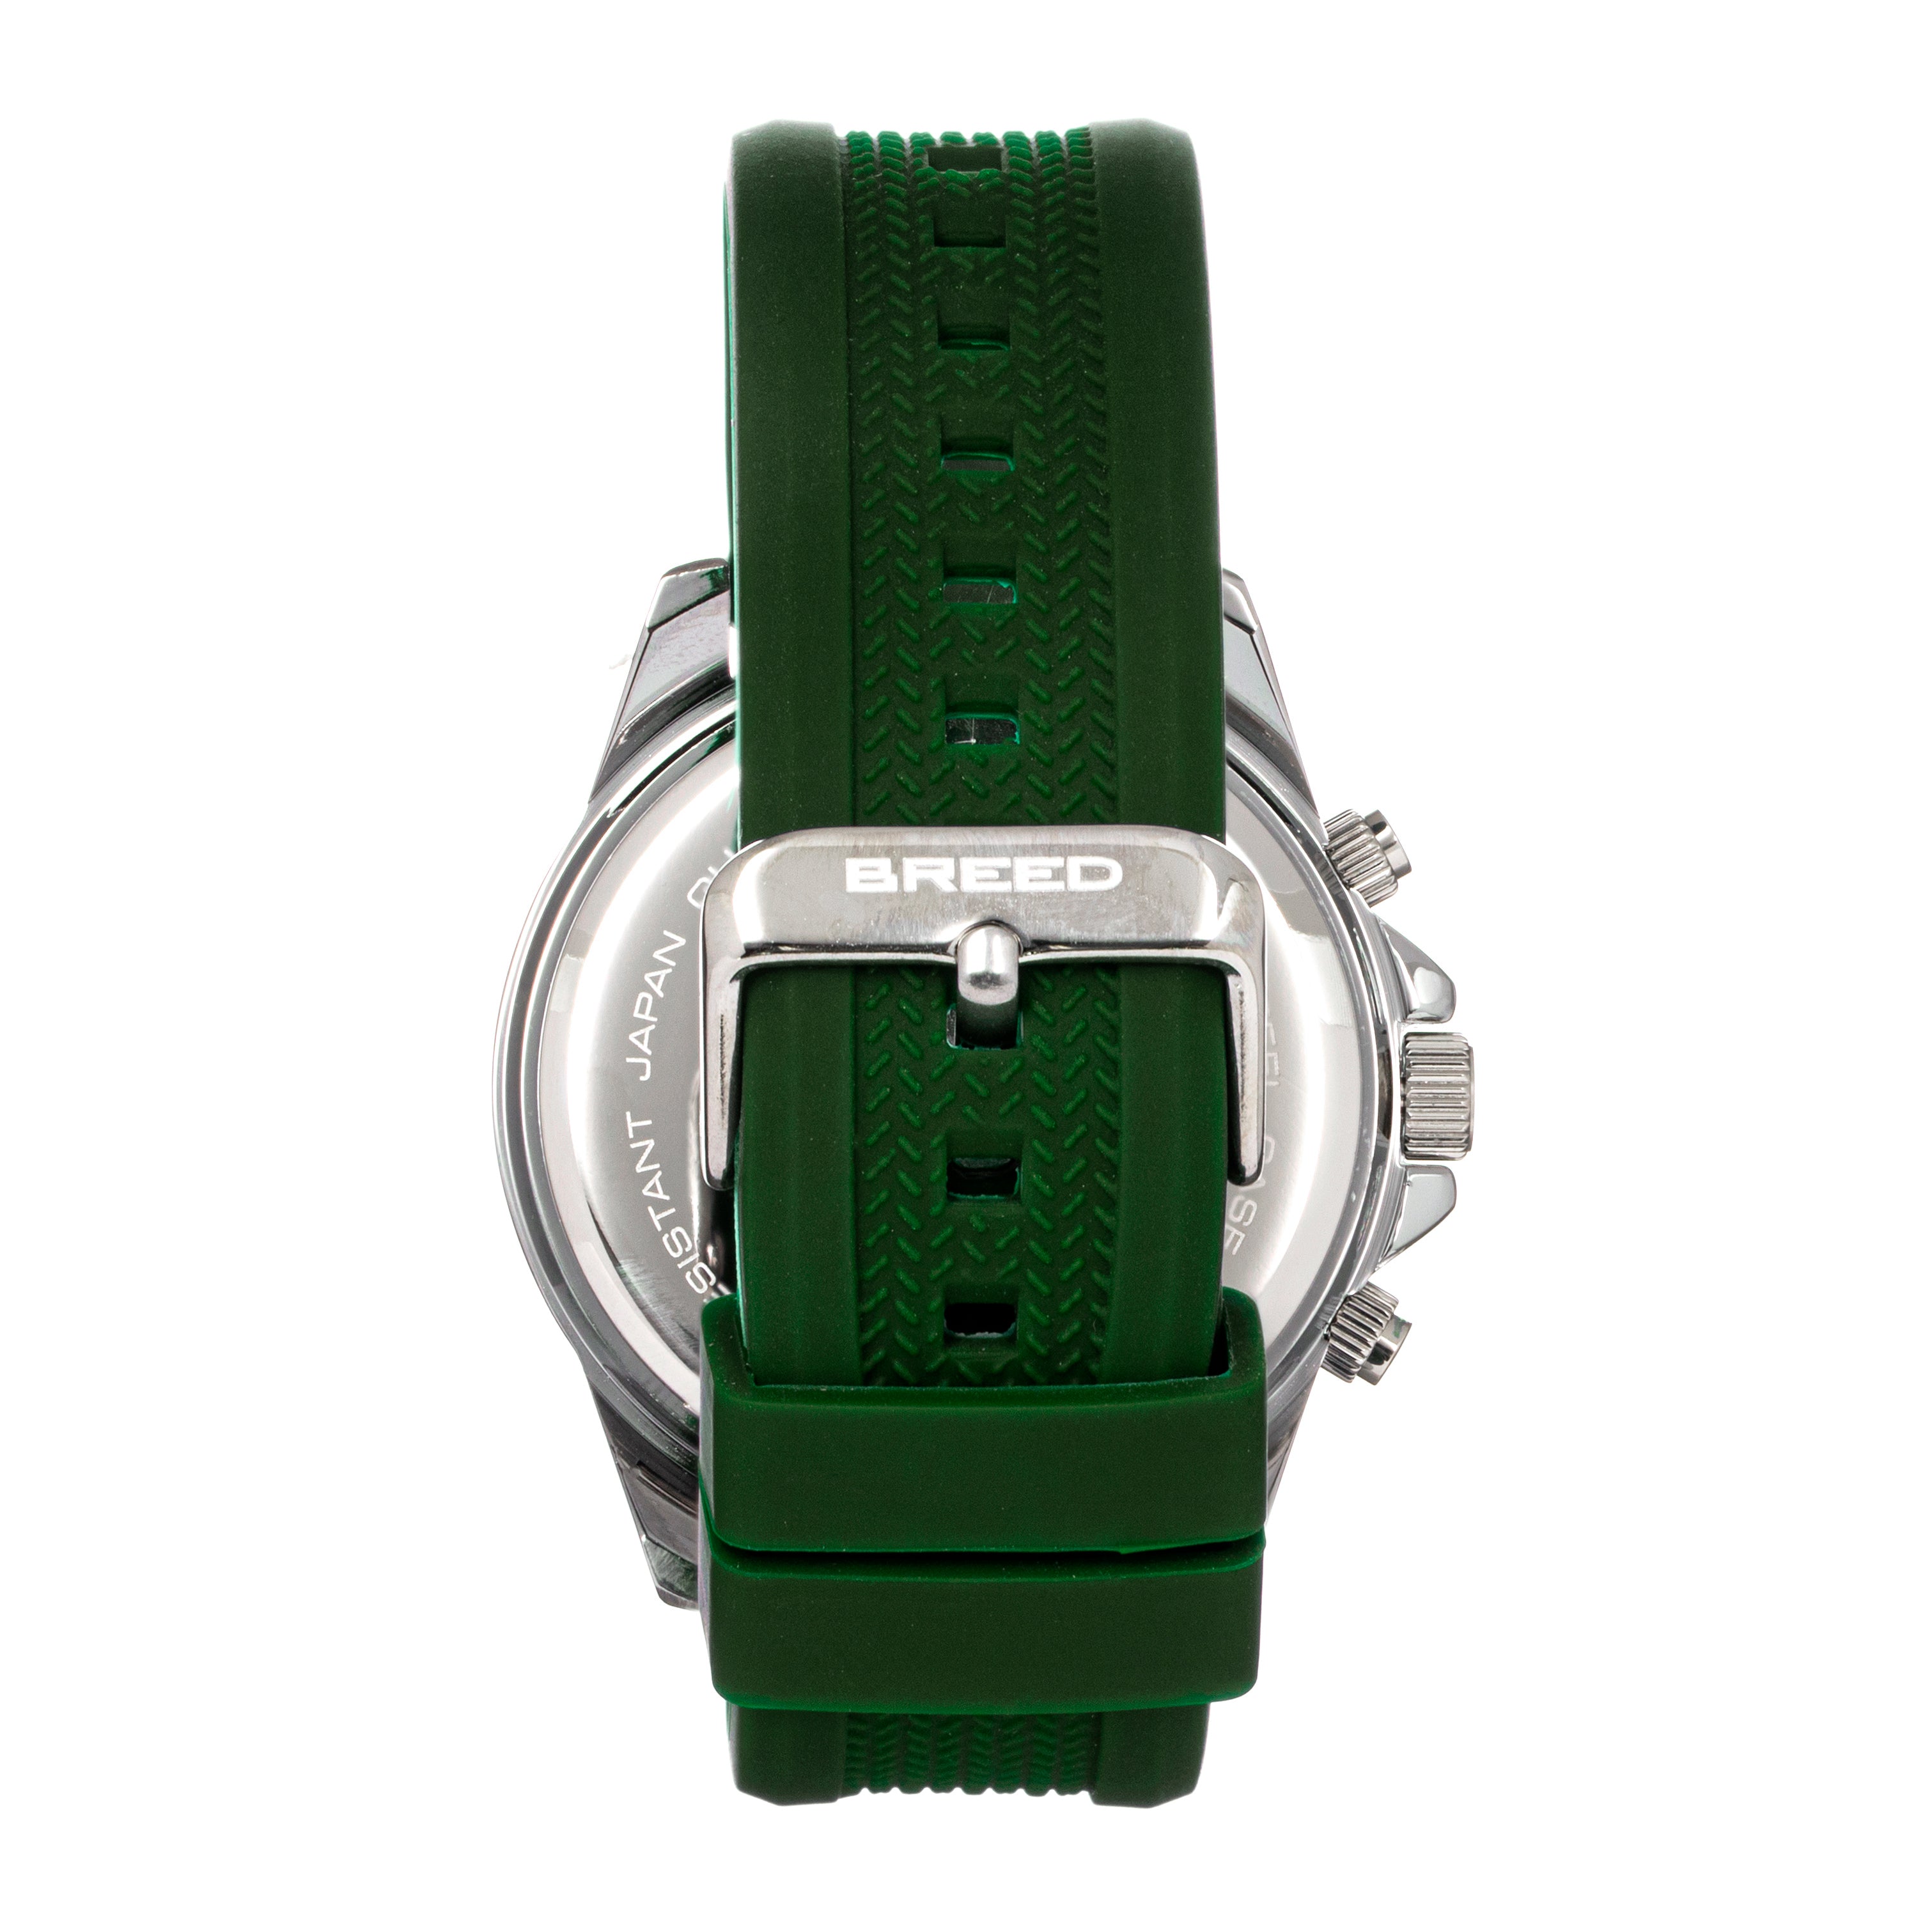 Breed Tempo Chronograph Strap Watch - Green - BRD9101